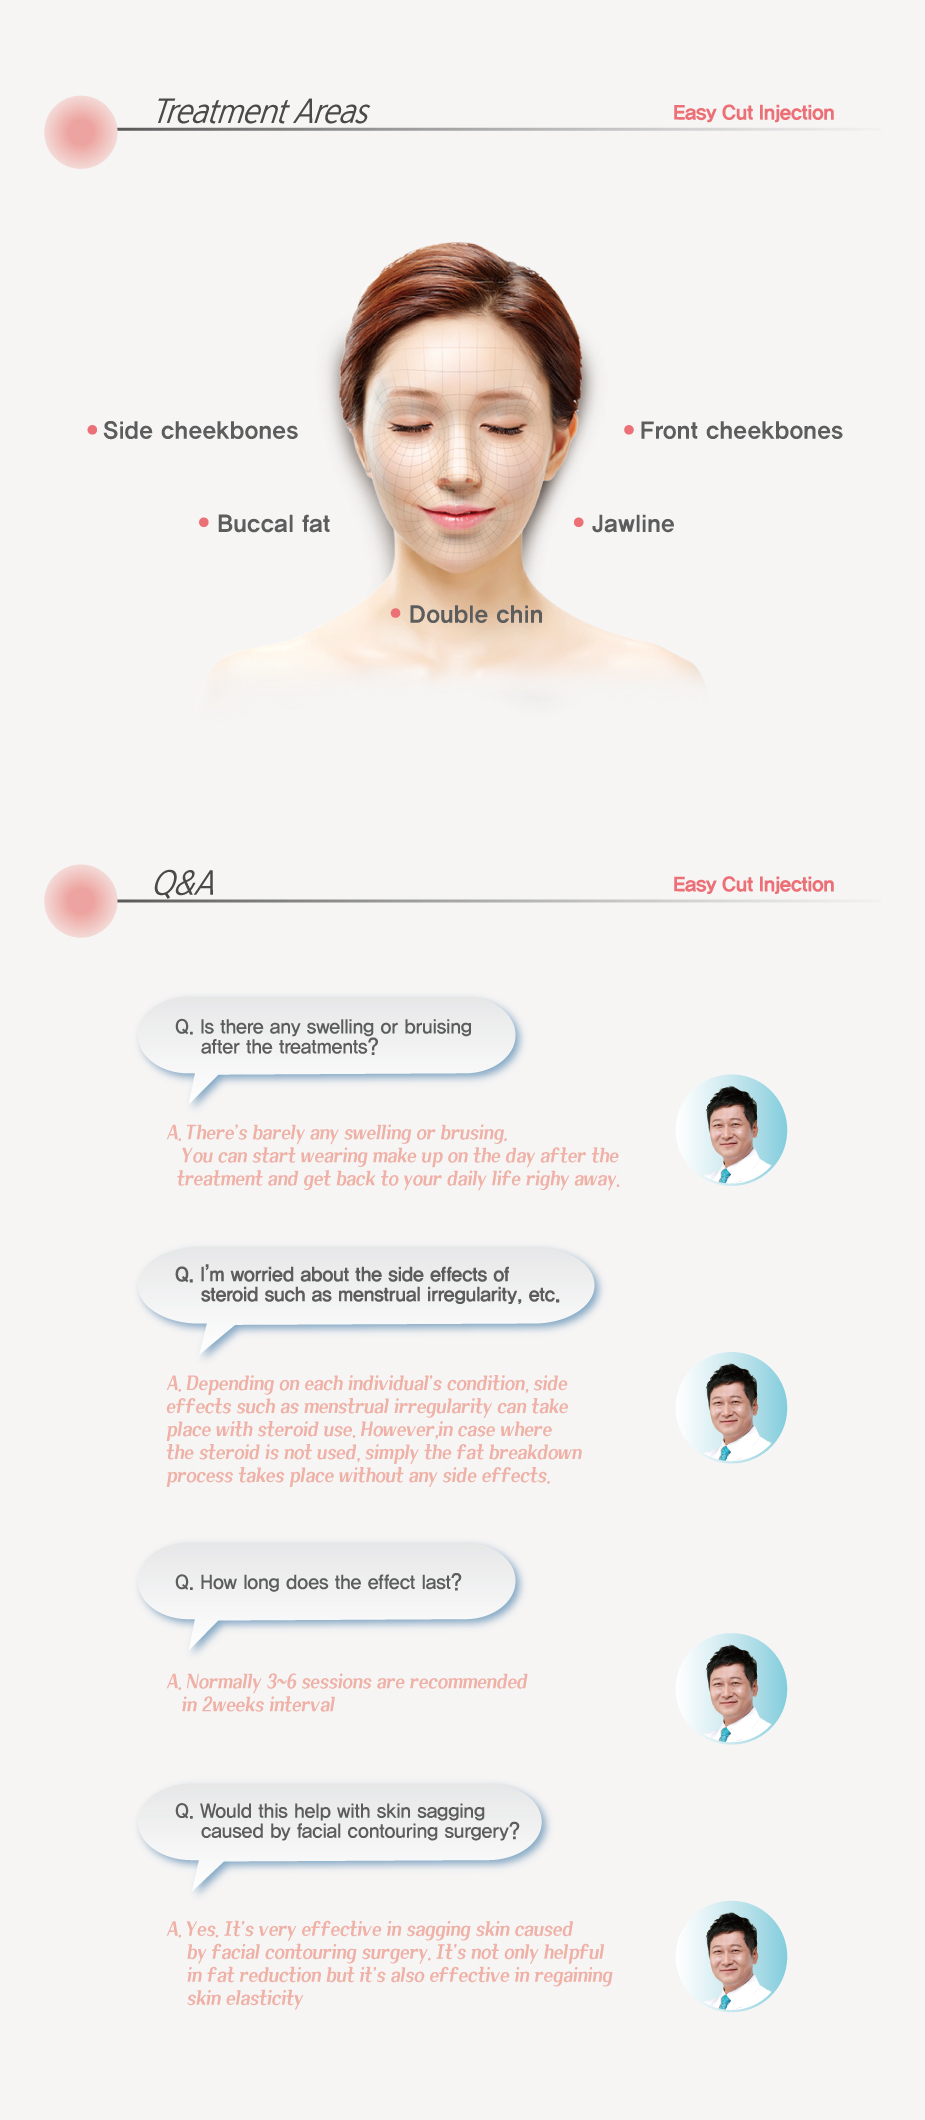 Easy Cut Injection-Treatment Areas